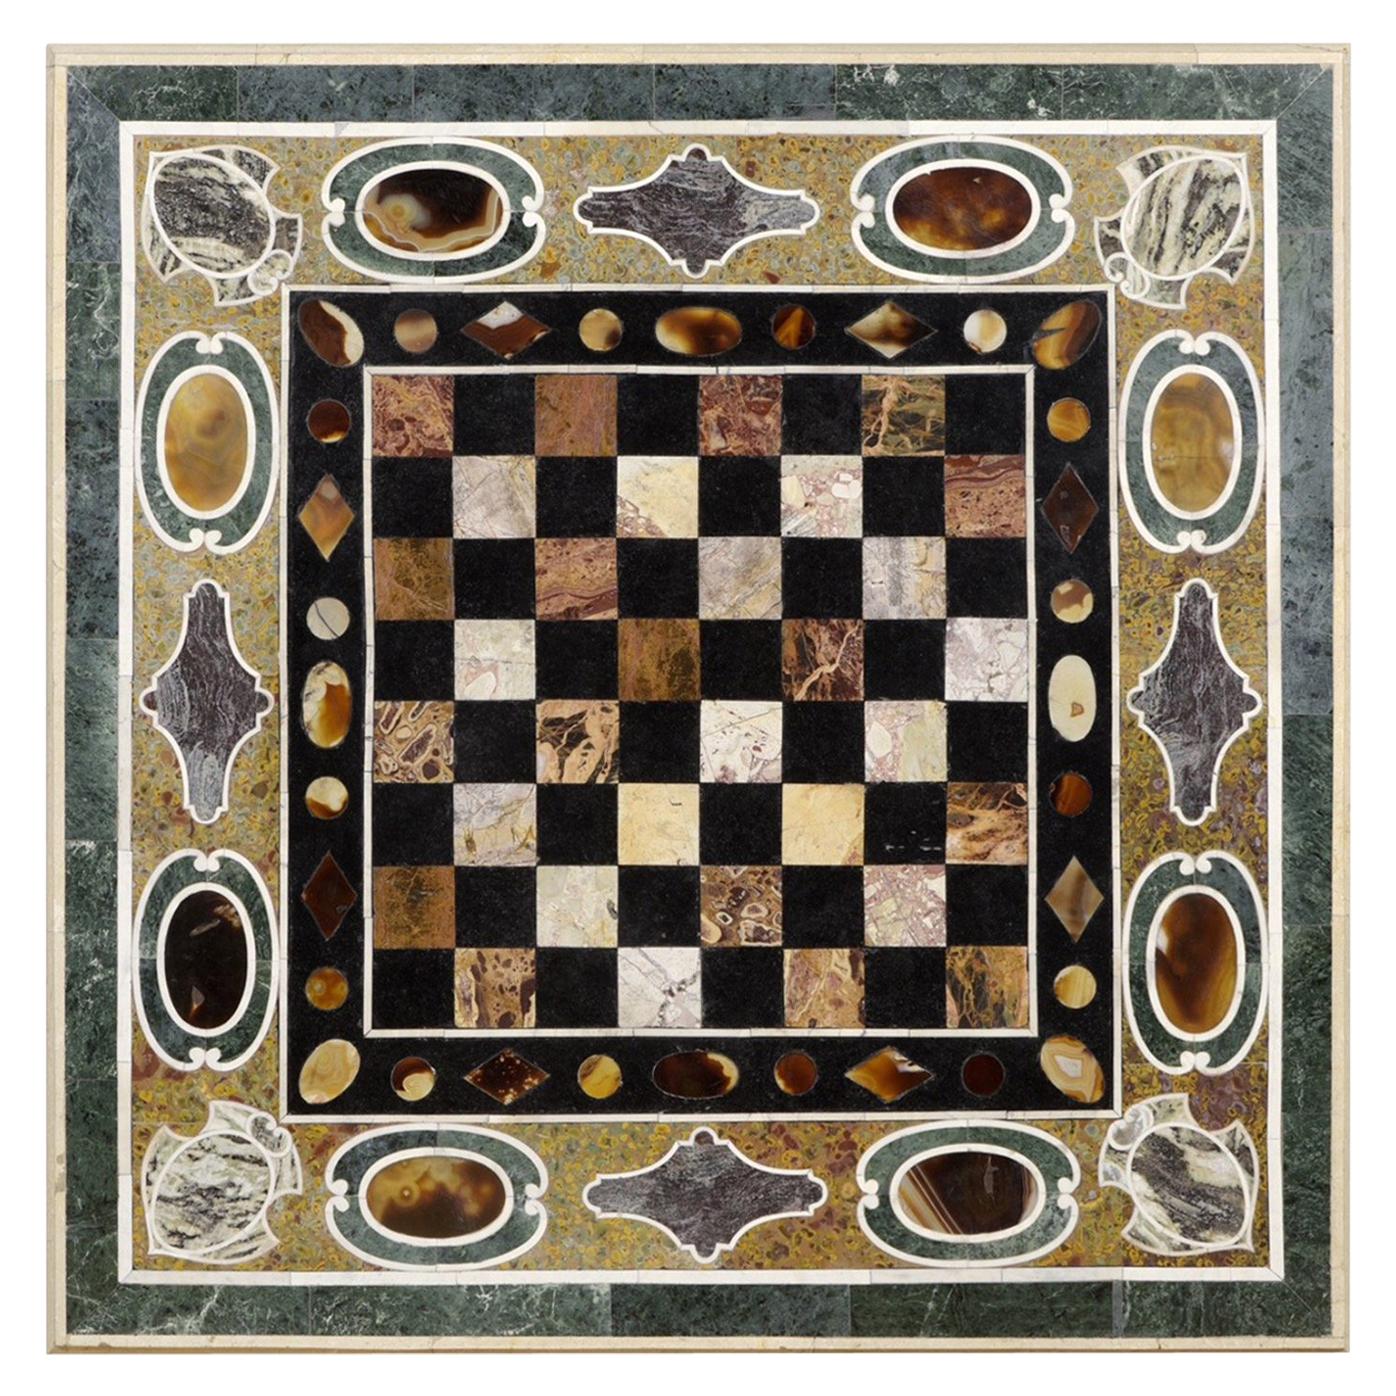 Pietra Dura 'Hard Stones Marquetry' Tabletop with Chess Board, 20th Century